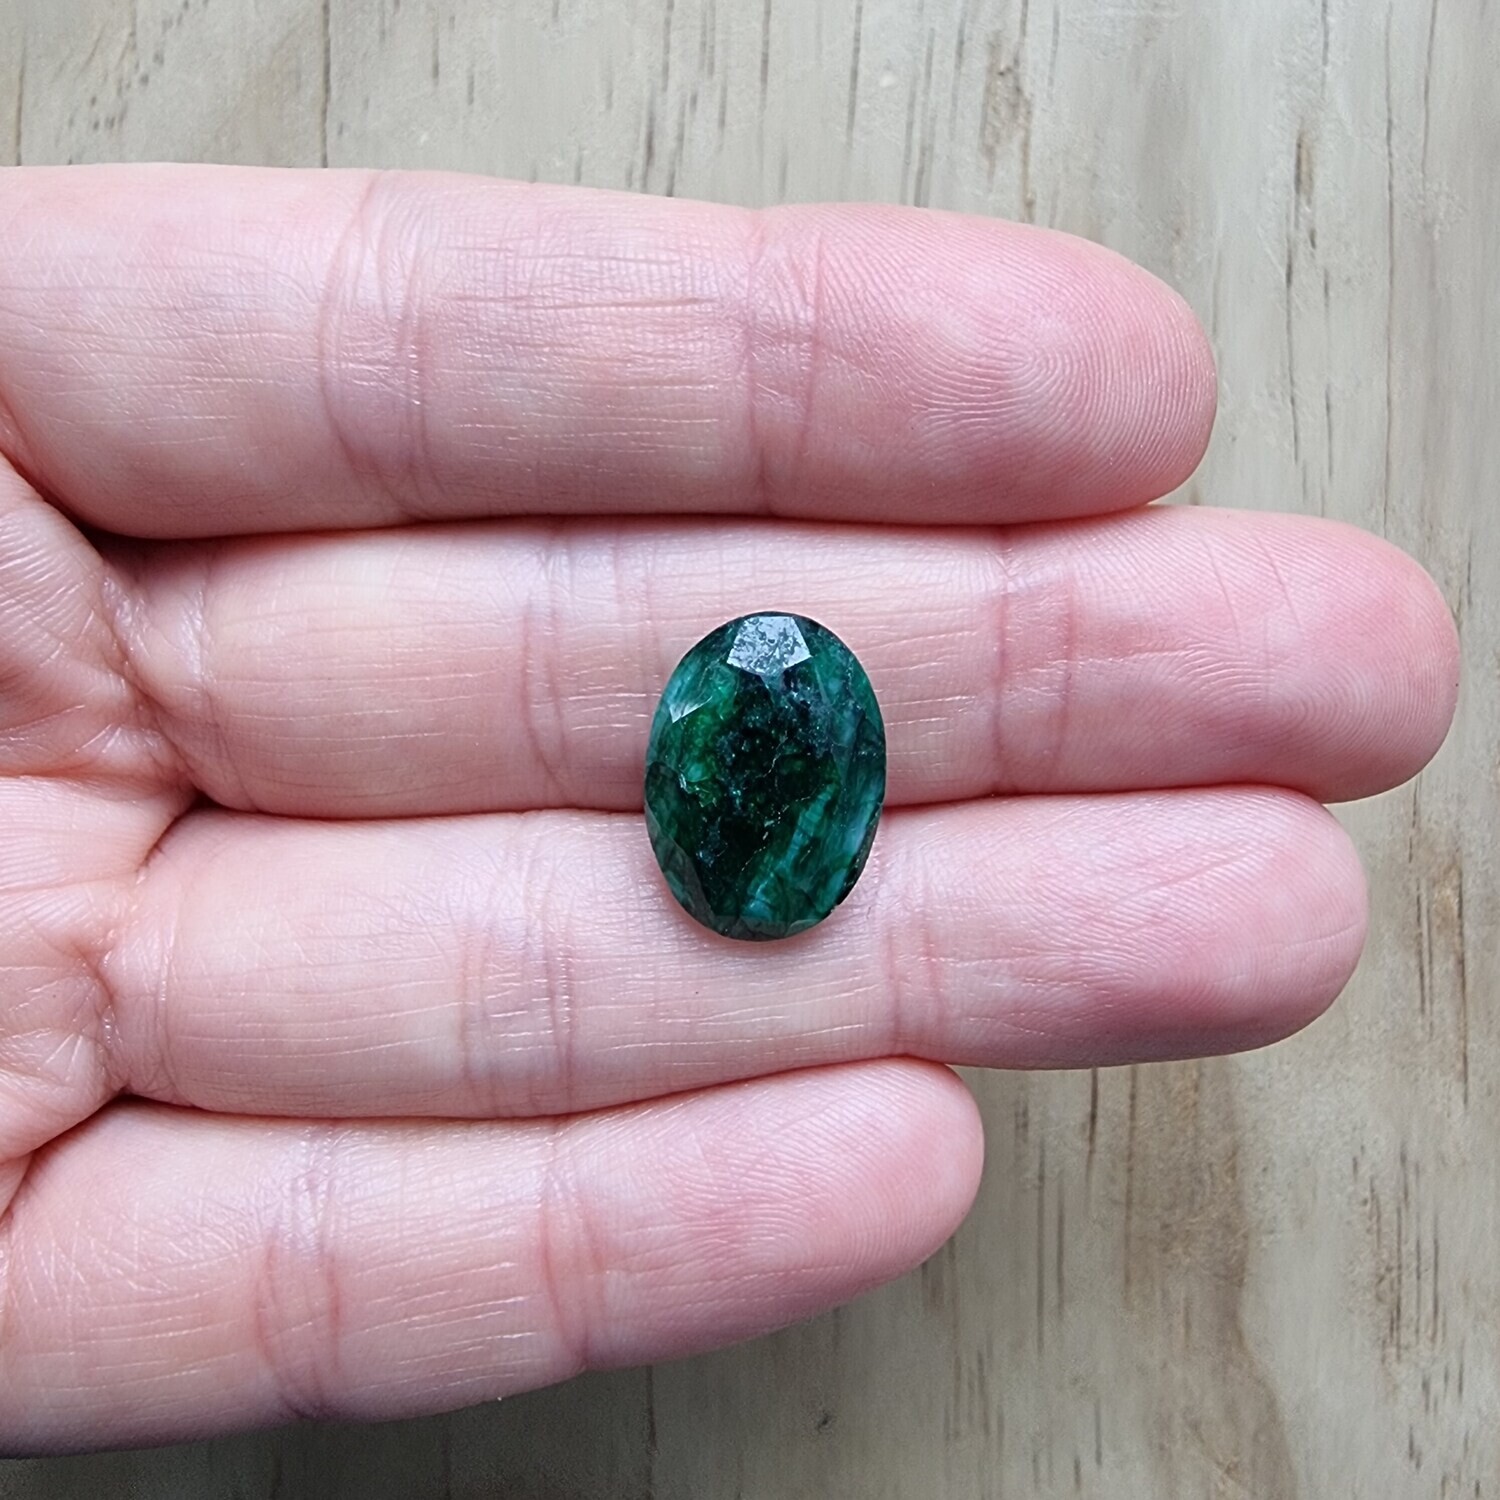 Dyed Emerald Cabochon / Pendant for jewelry making or diy craft projects 2.3gr